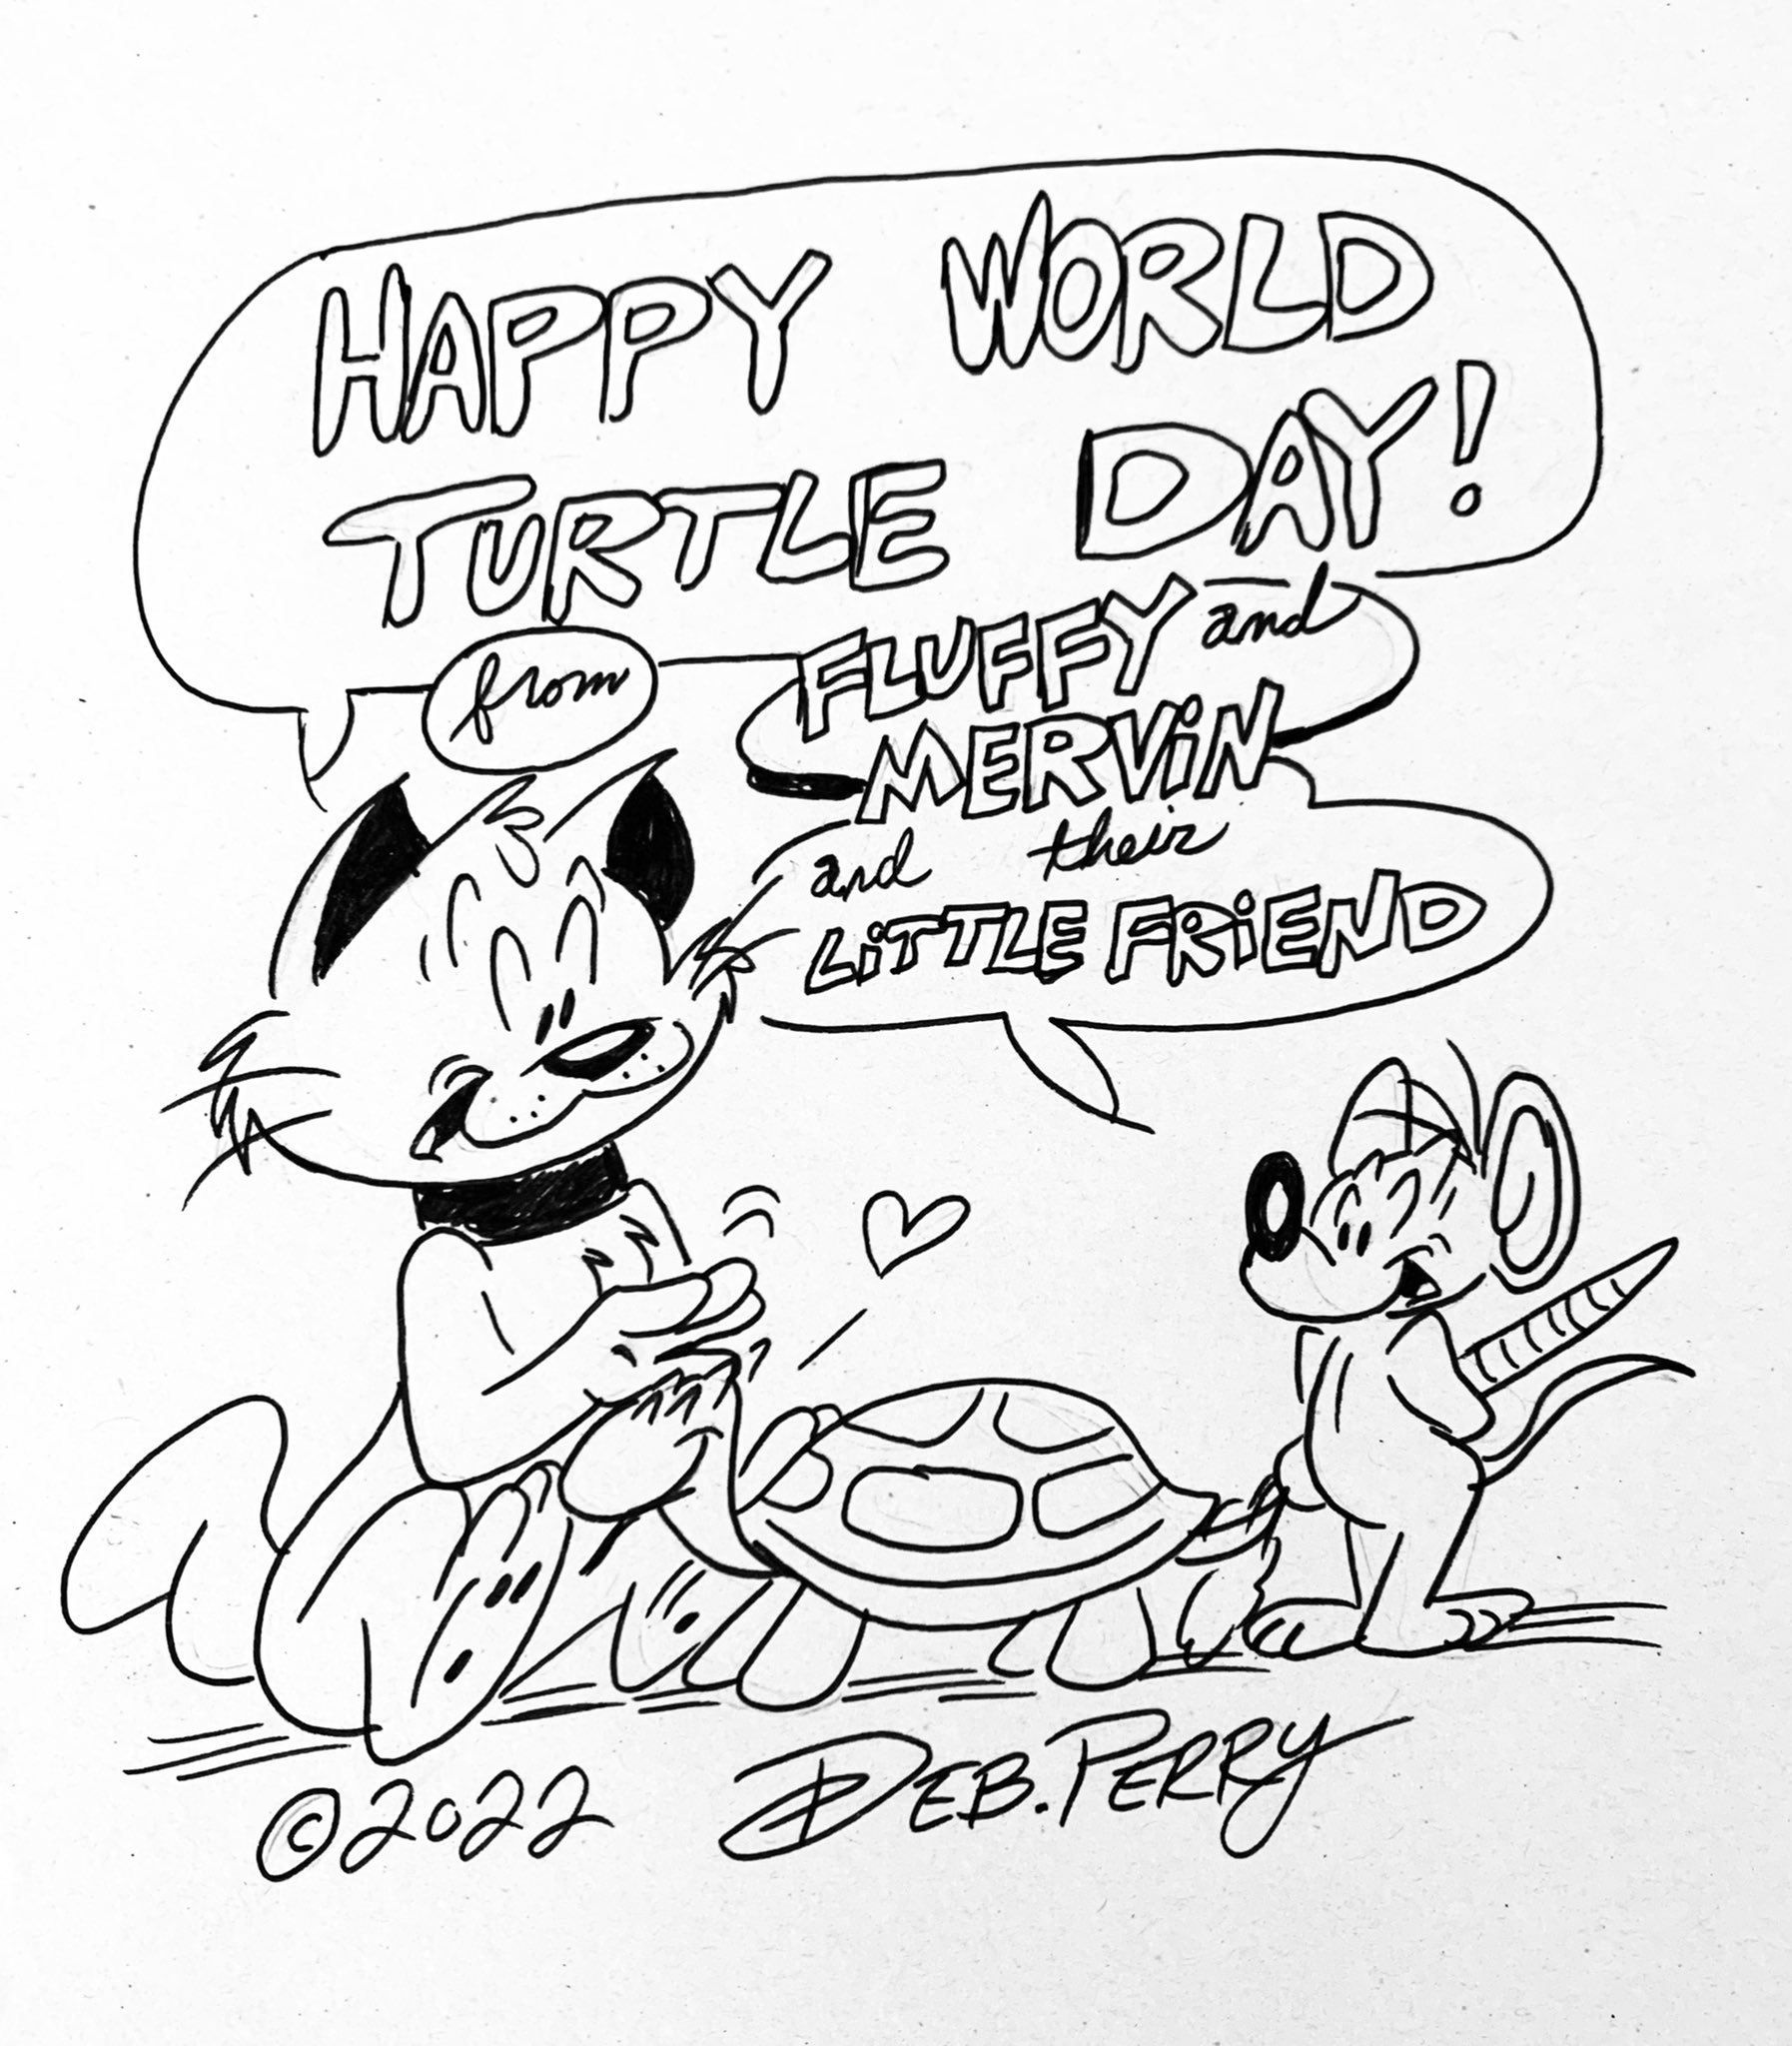 From Fluffy and Mervin and their Little Friend!
